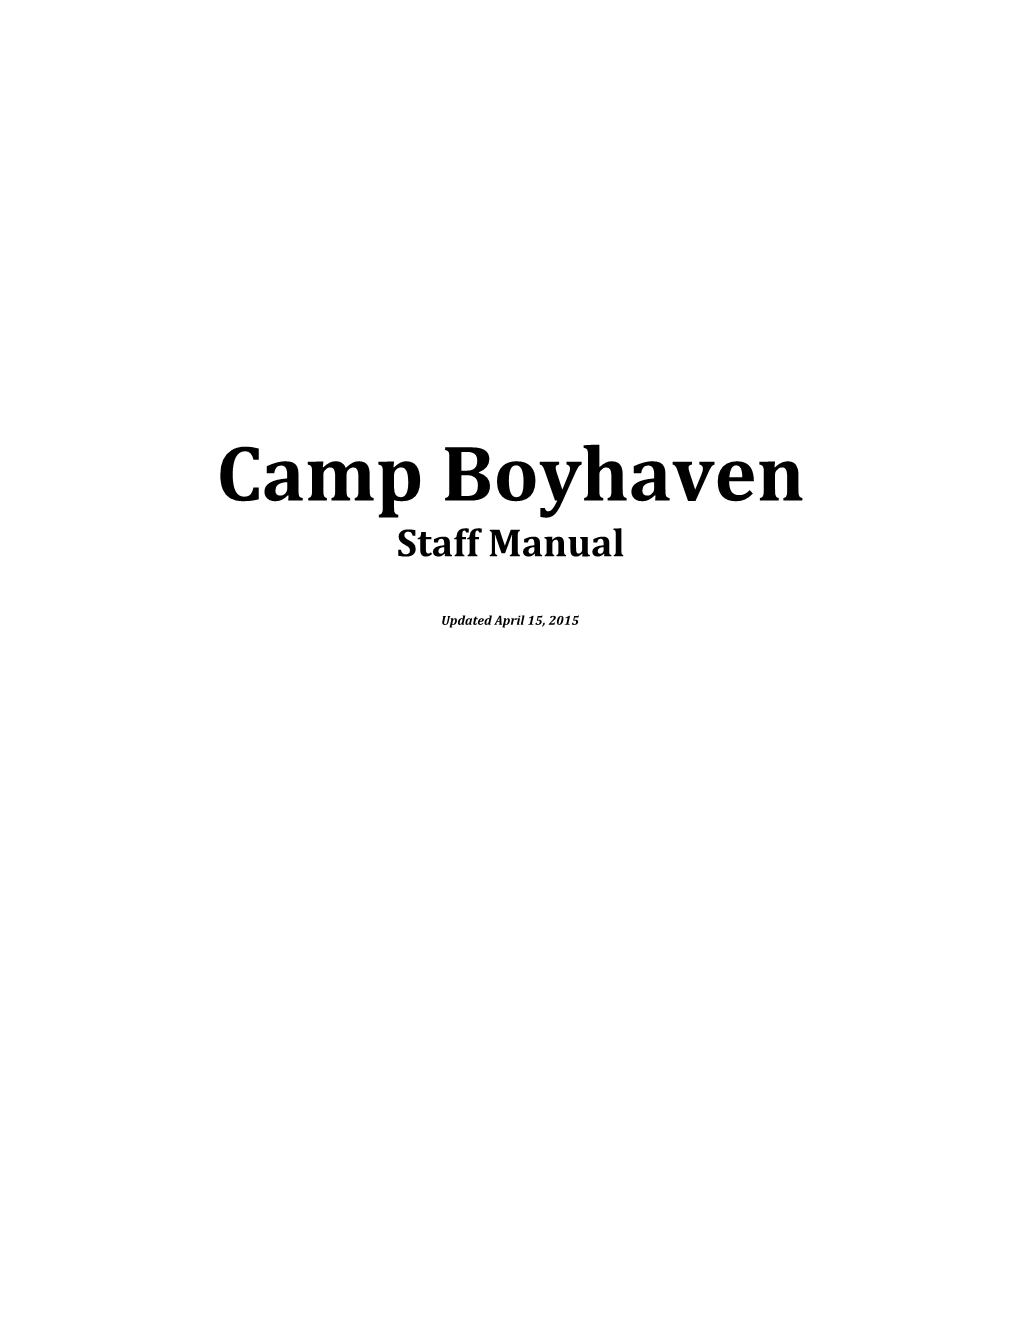 The Core Purpose of the Camp Boyhaven Experience Is To